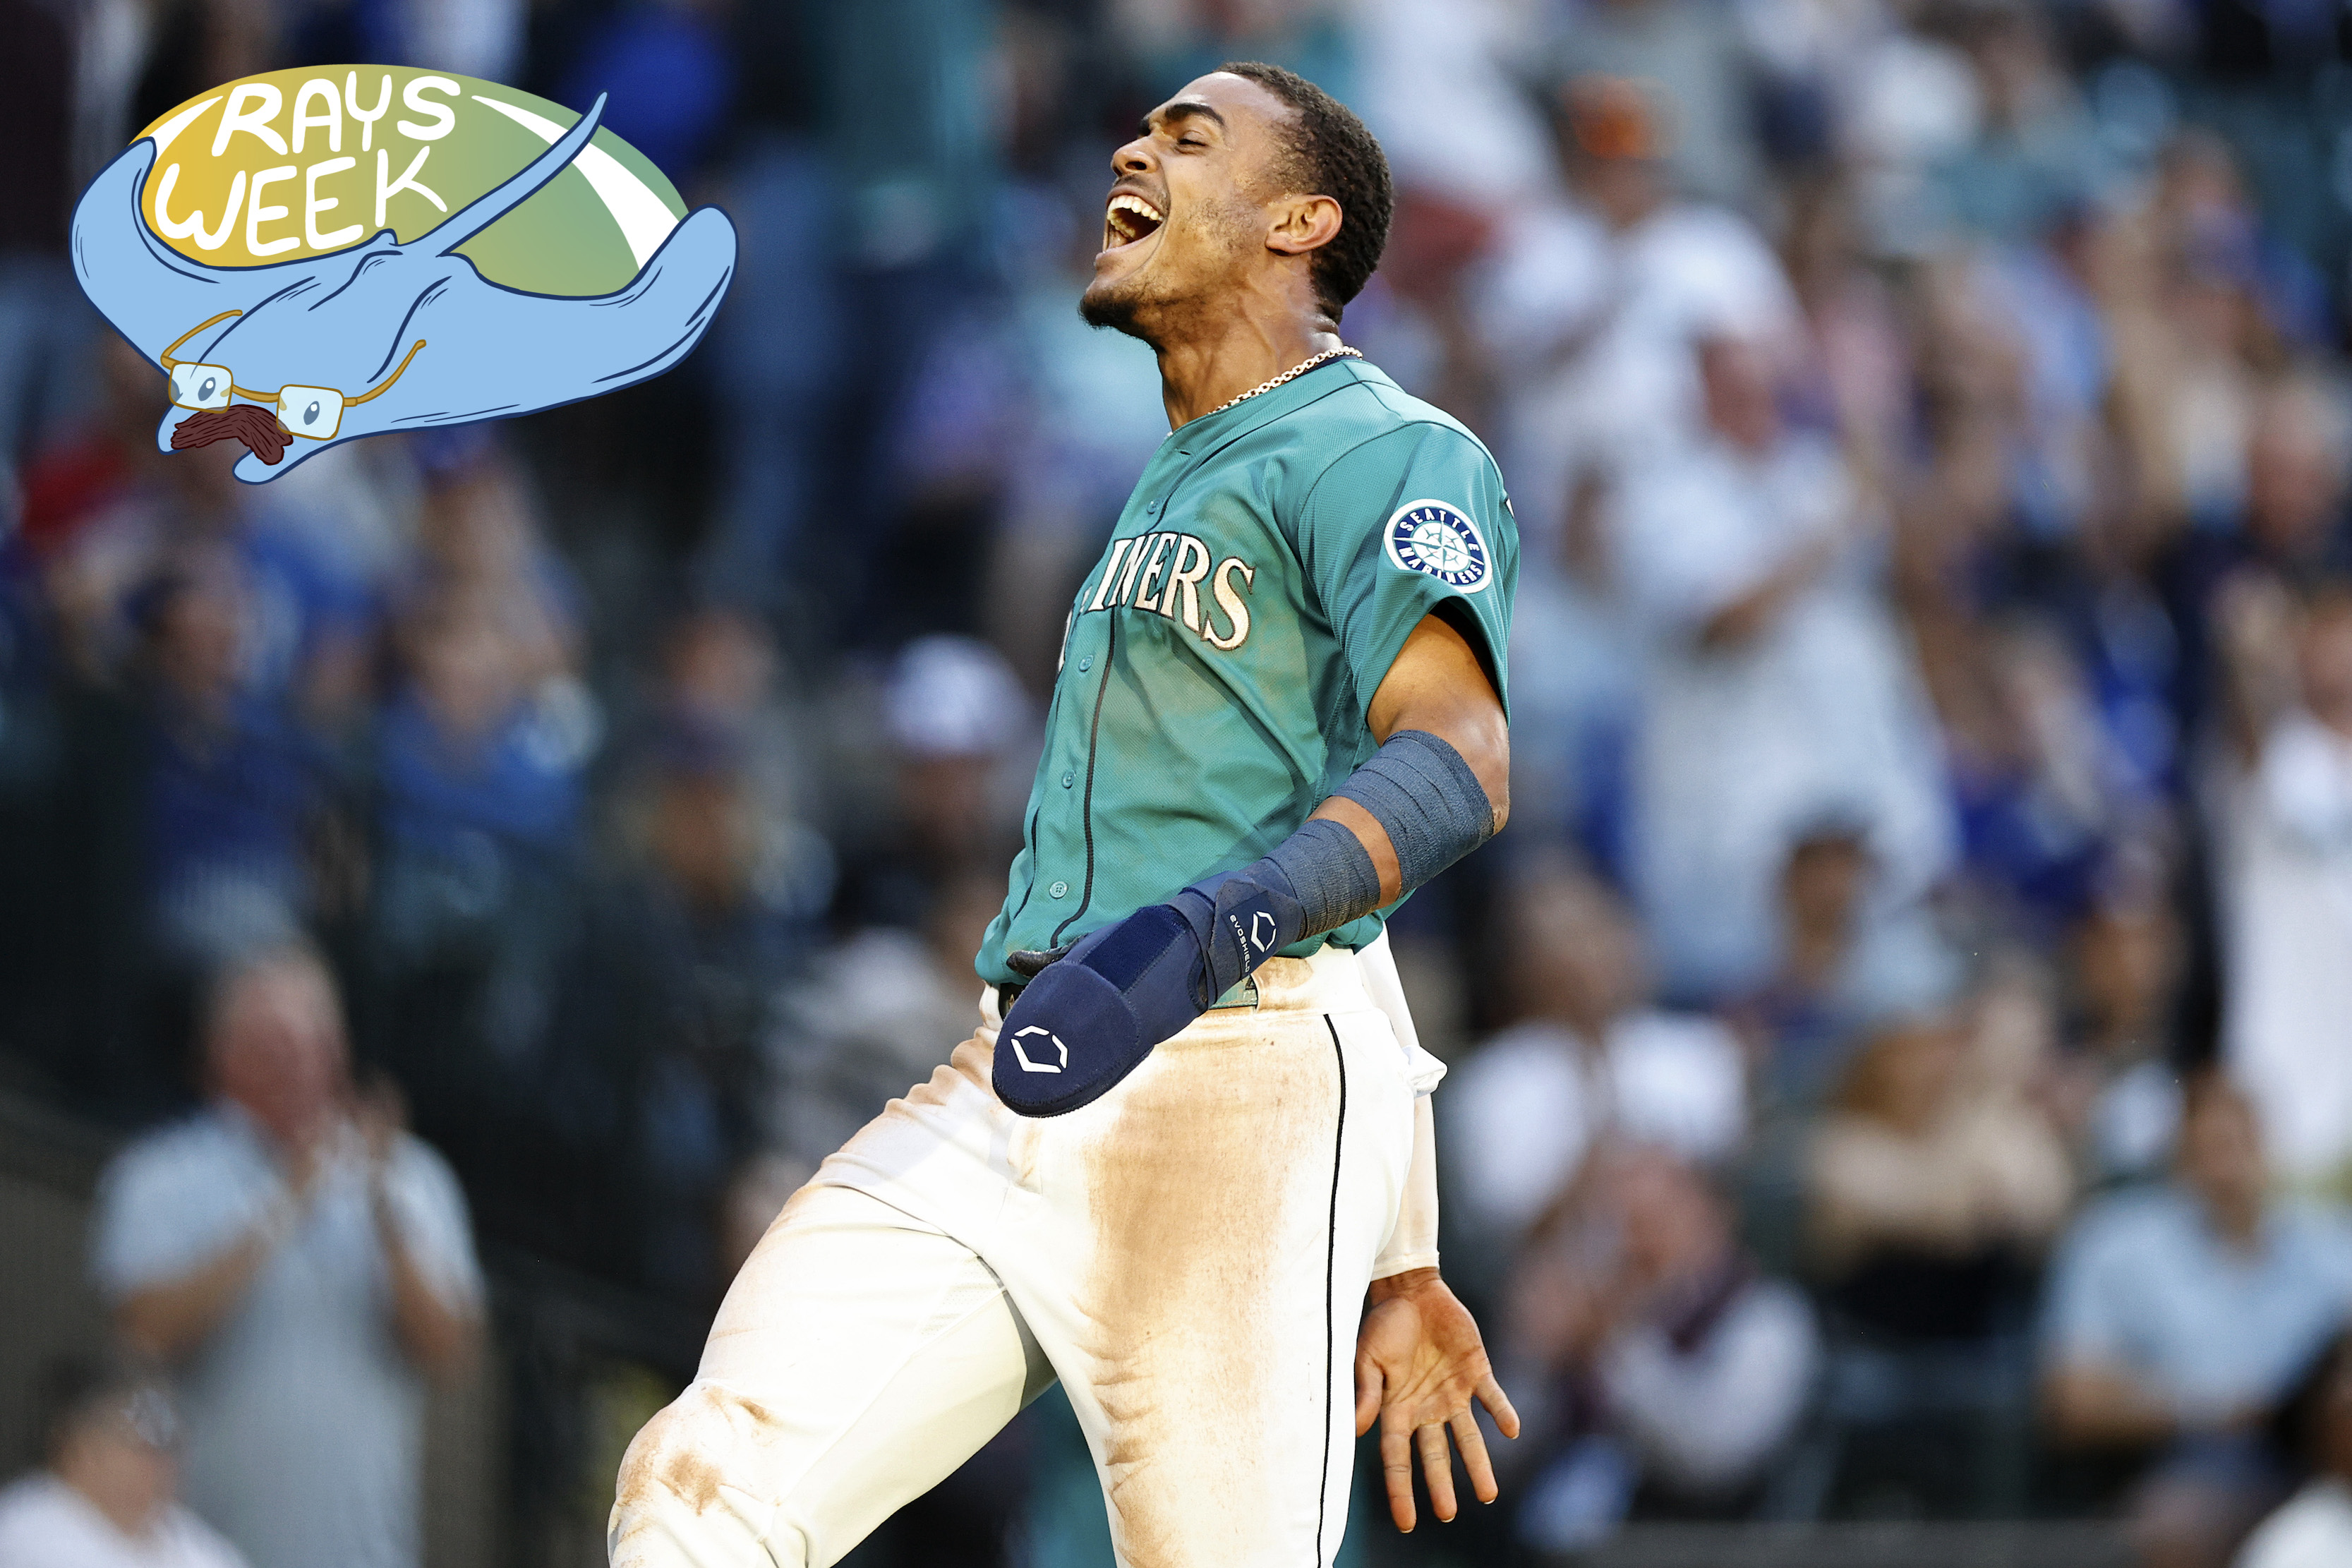 Julio Rodriguez of the Mariners exulting after a win, near the Rays Week badge.